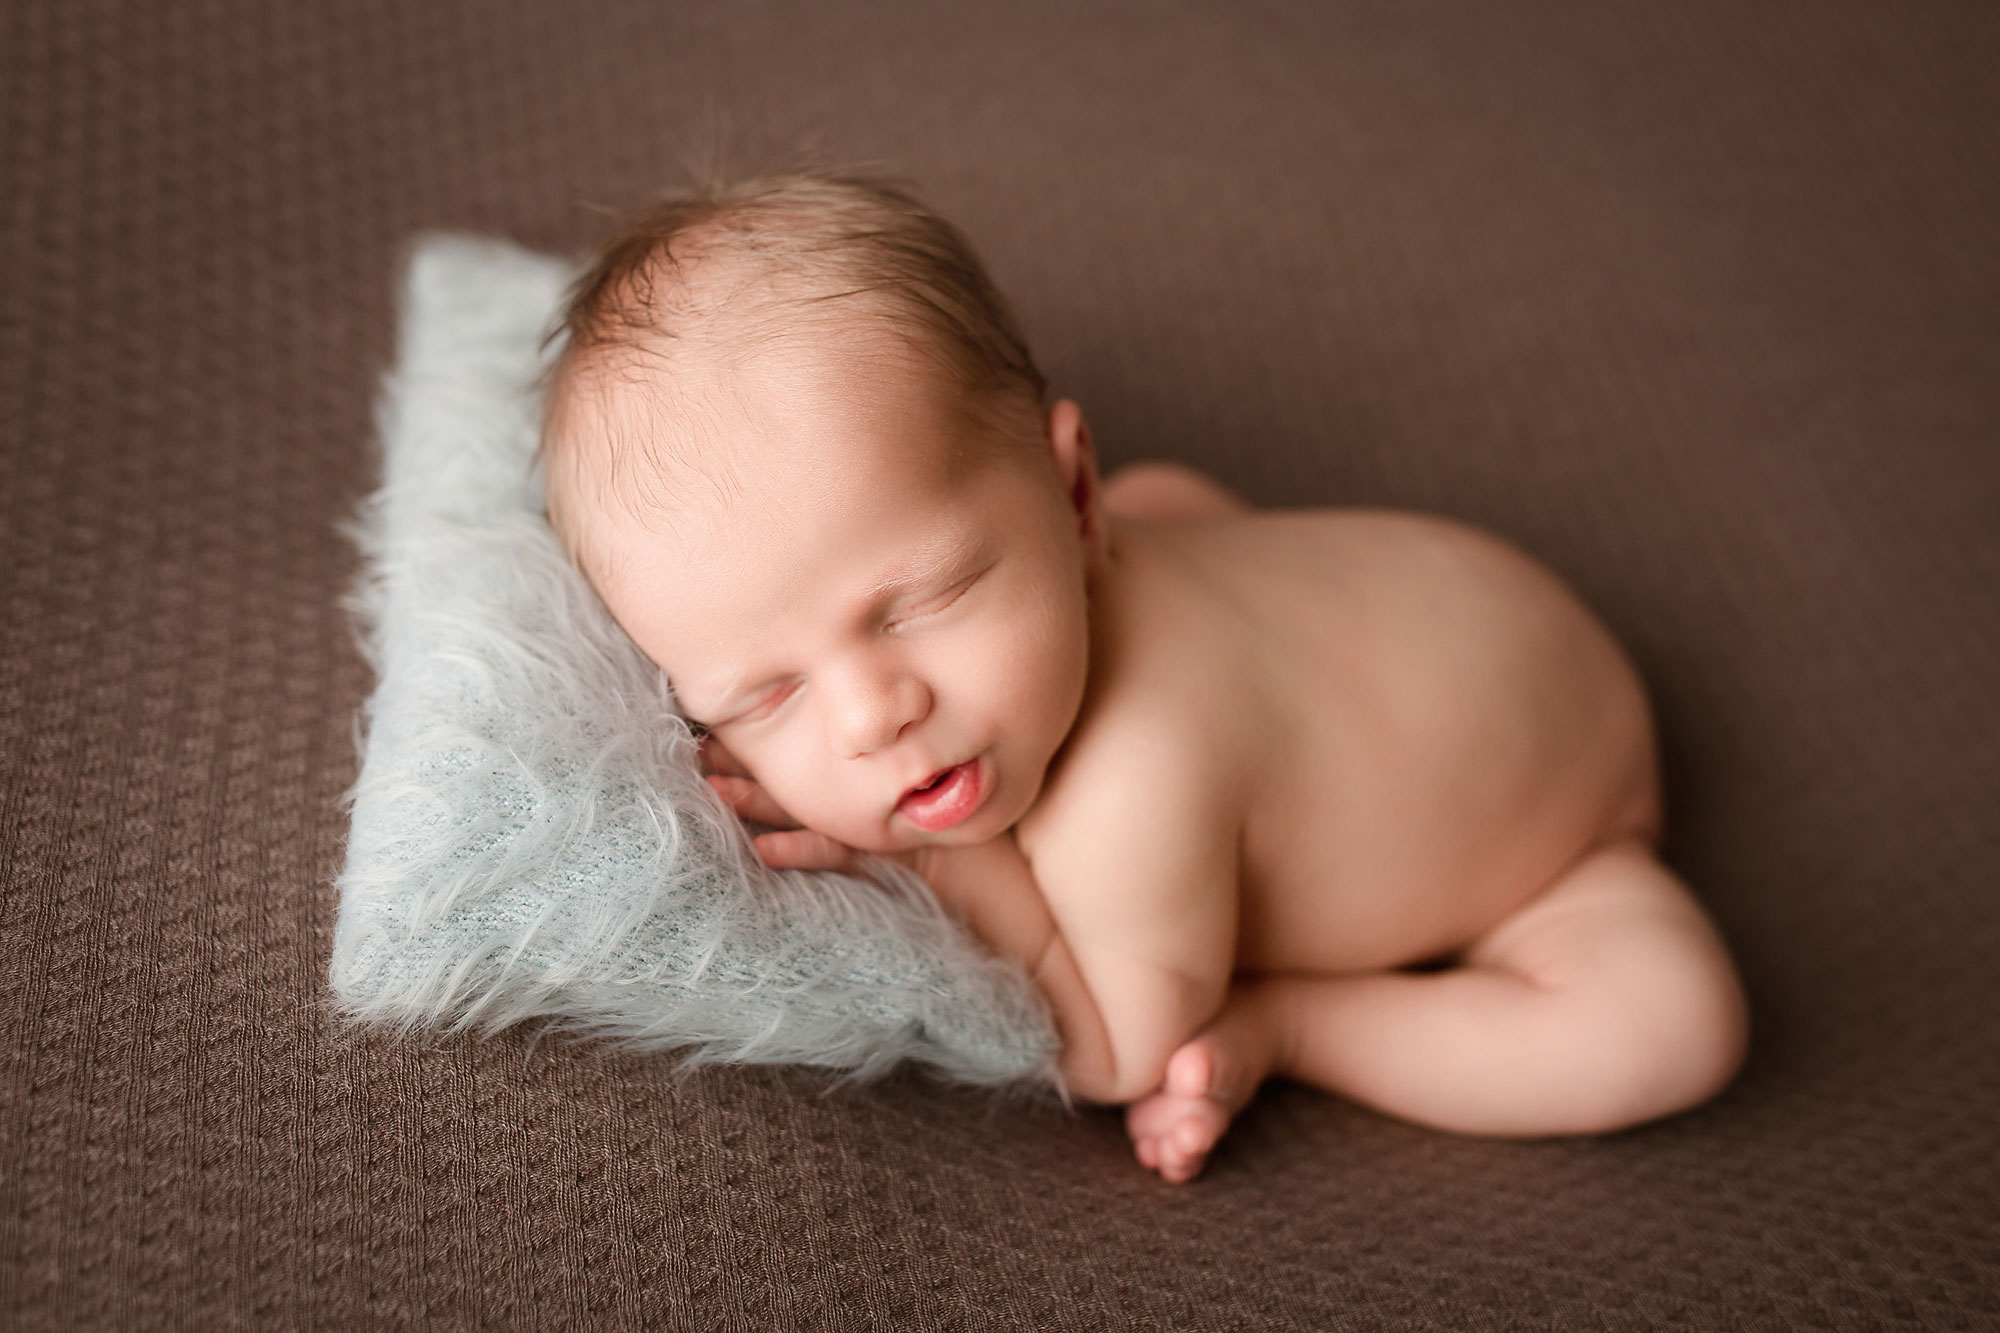 professional baby pictures bridgewater, naked baby asleep on fluffy pillow